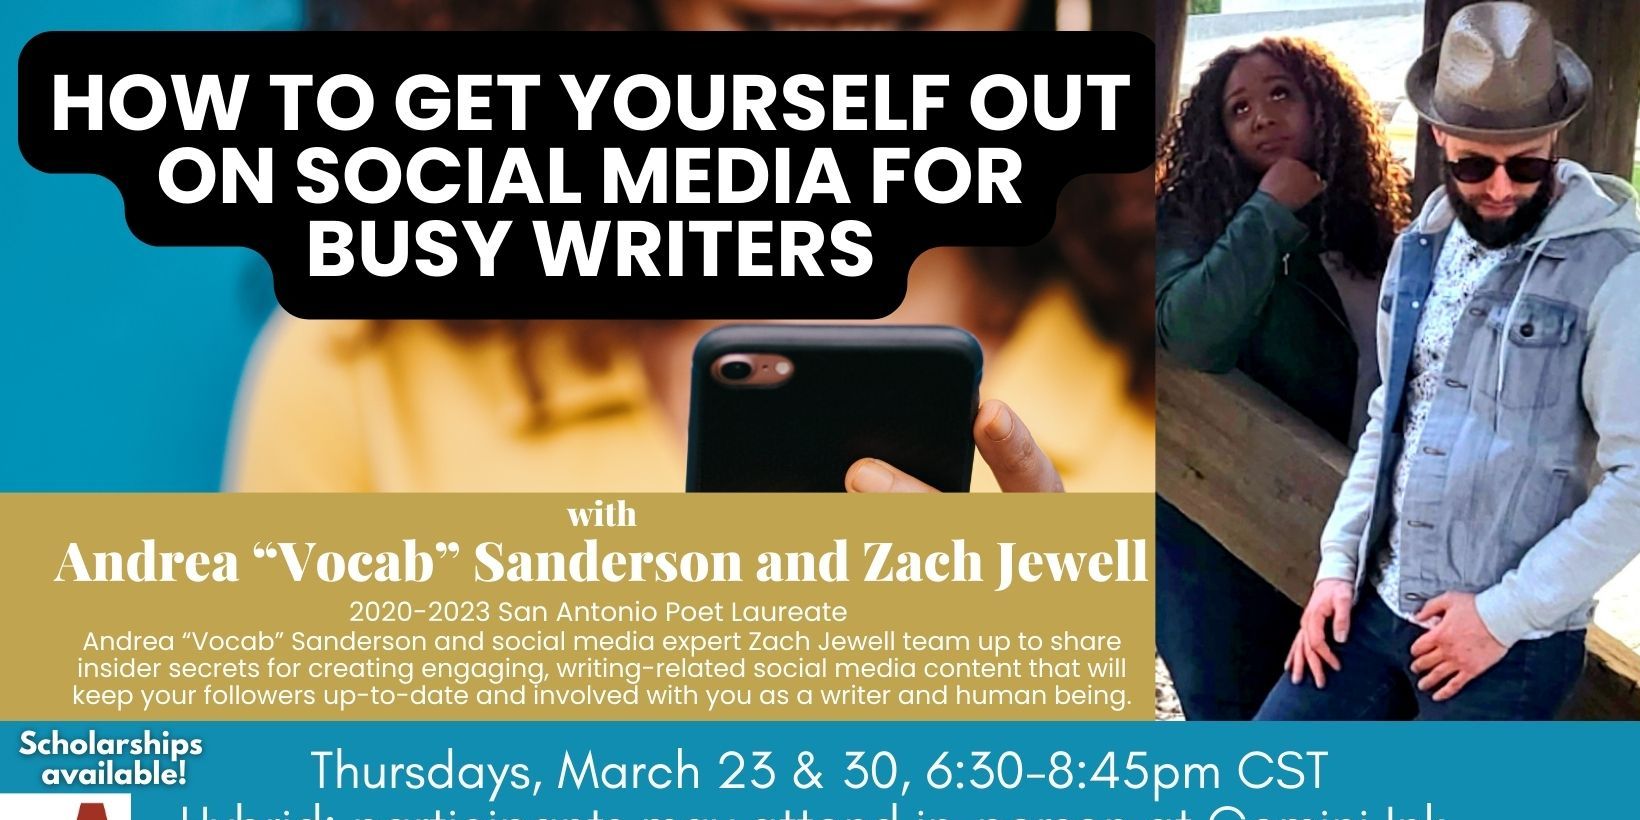 How to Get Yourself Out on Social Media for Busy Writers with Andrea “Vocab” Sanderson and Zach Jewell promotional image